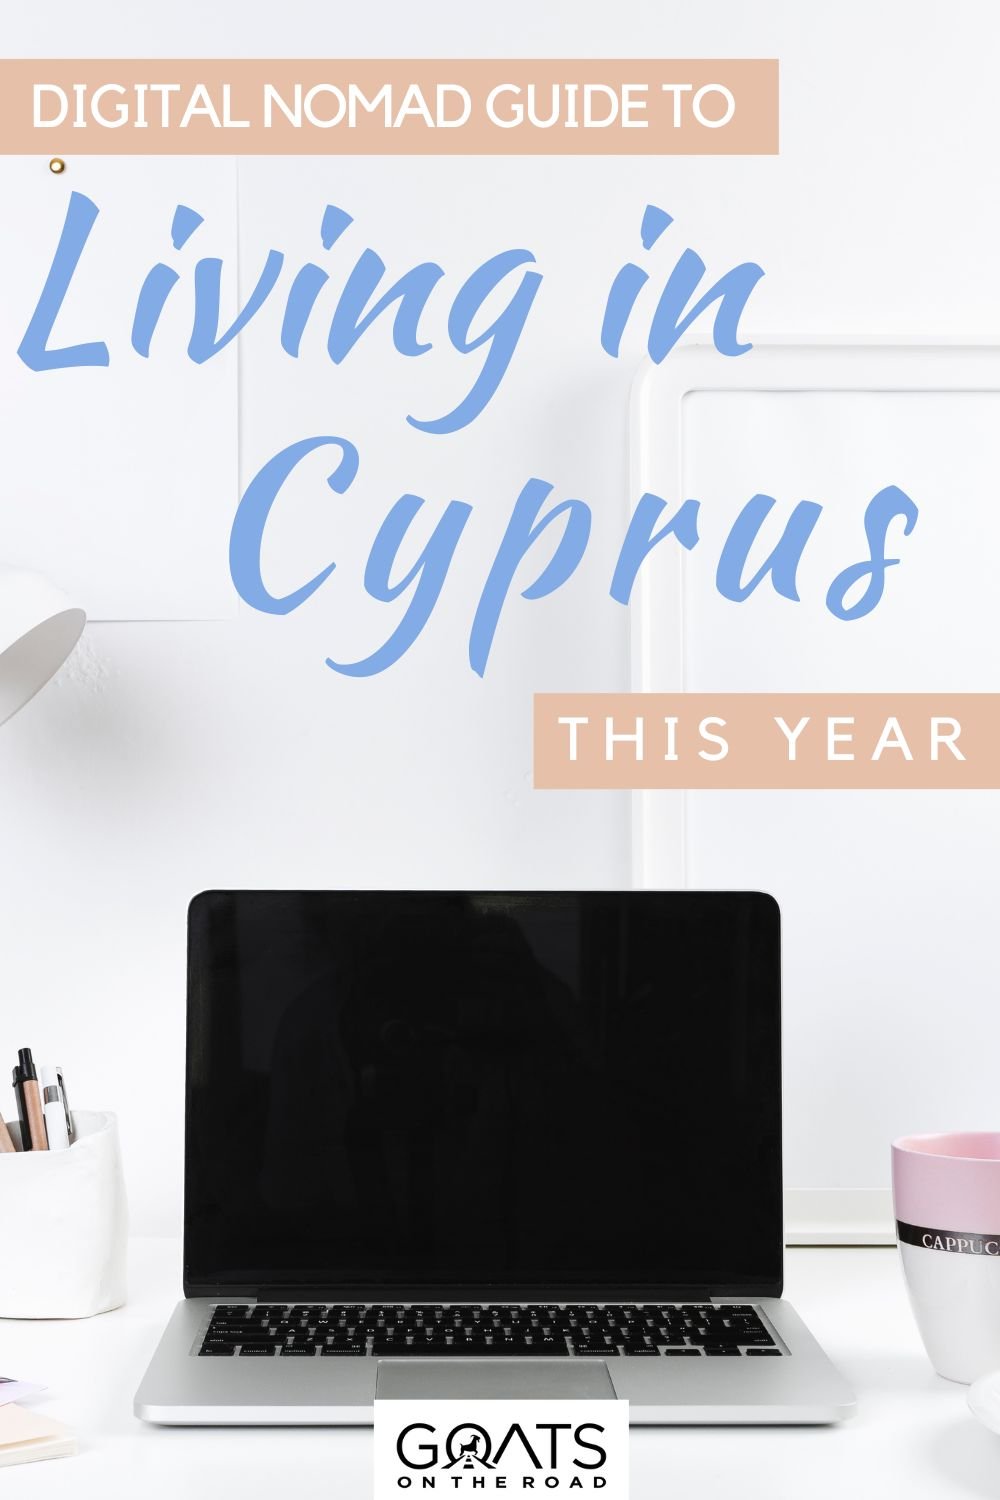 “Digital Nomad Guide to Living in Cyprus